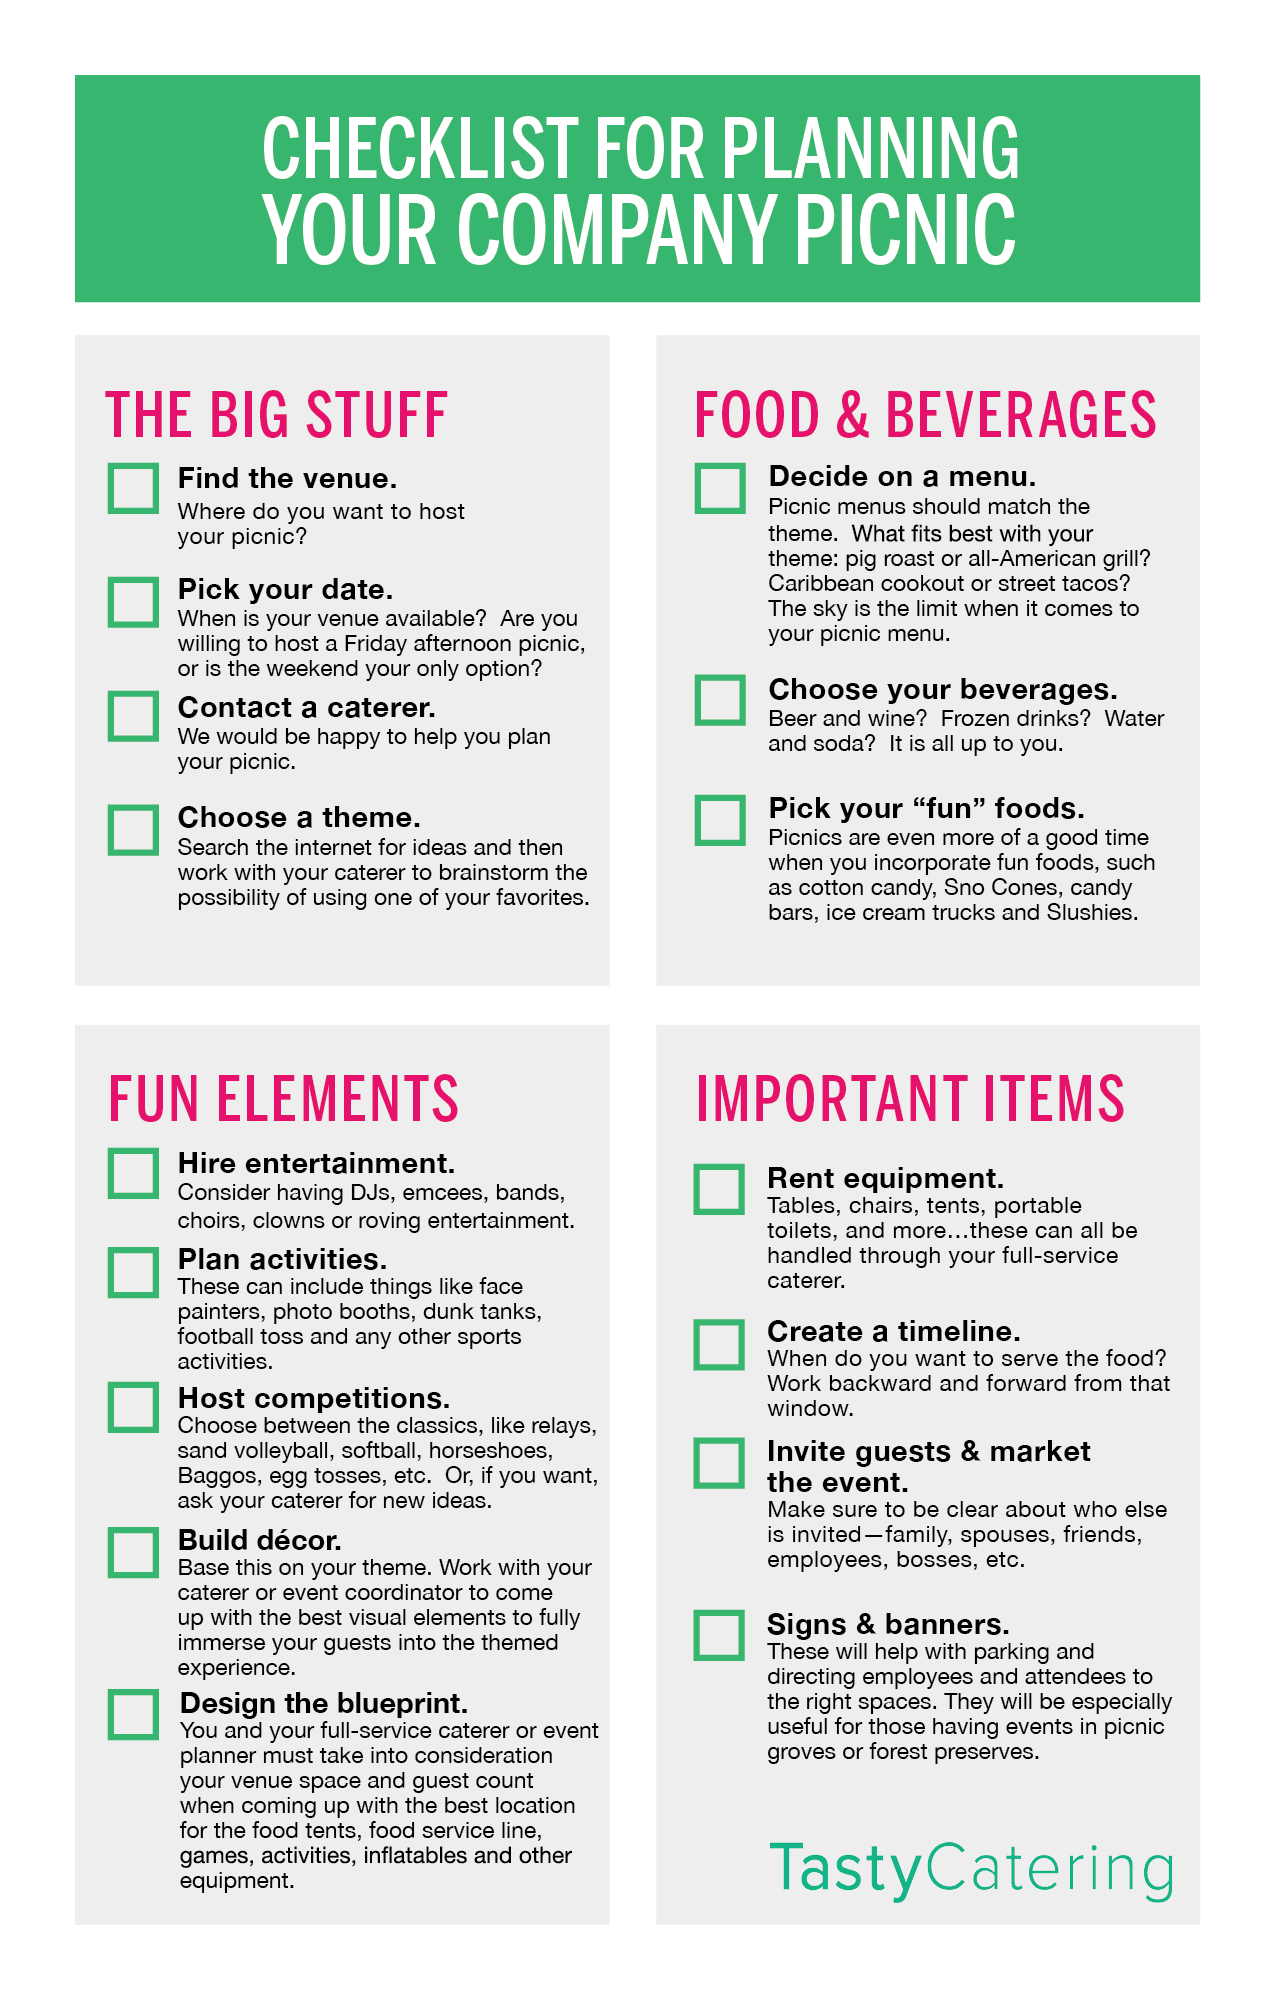 How To Plan An Event Checklist - arxiusarquitectura In Company Picnic Checklist Template With Regard To Company Picnic Checklist Template